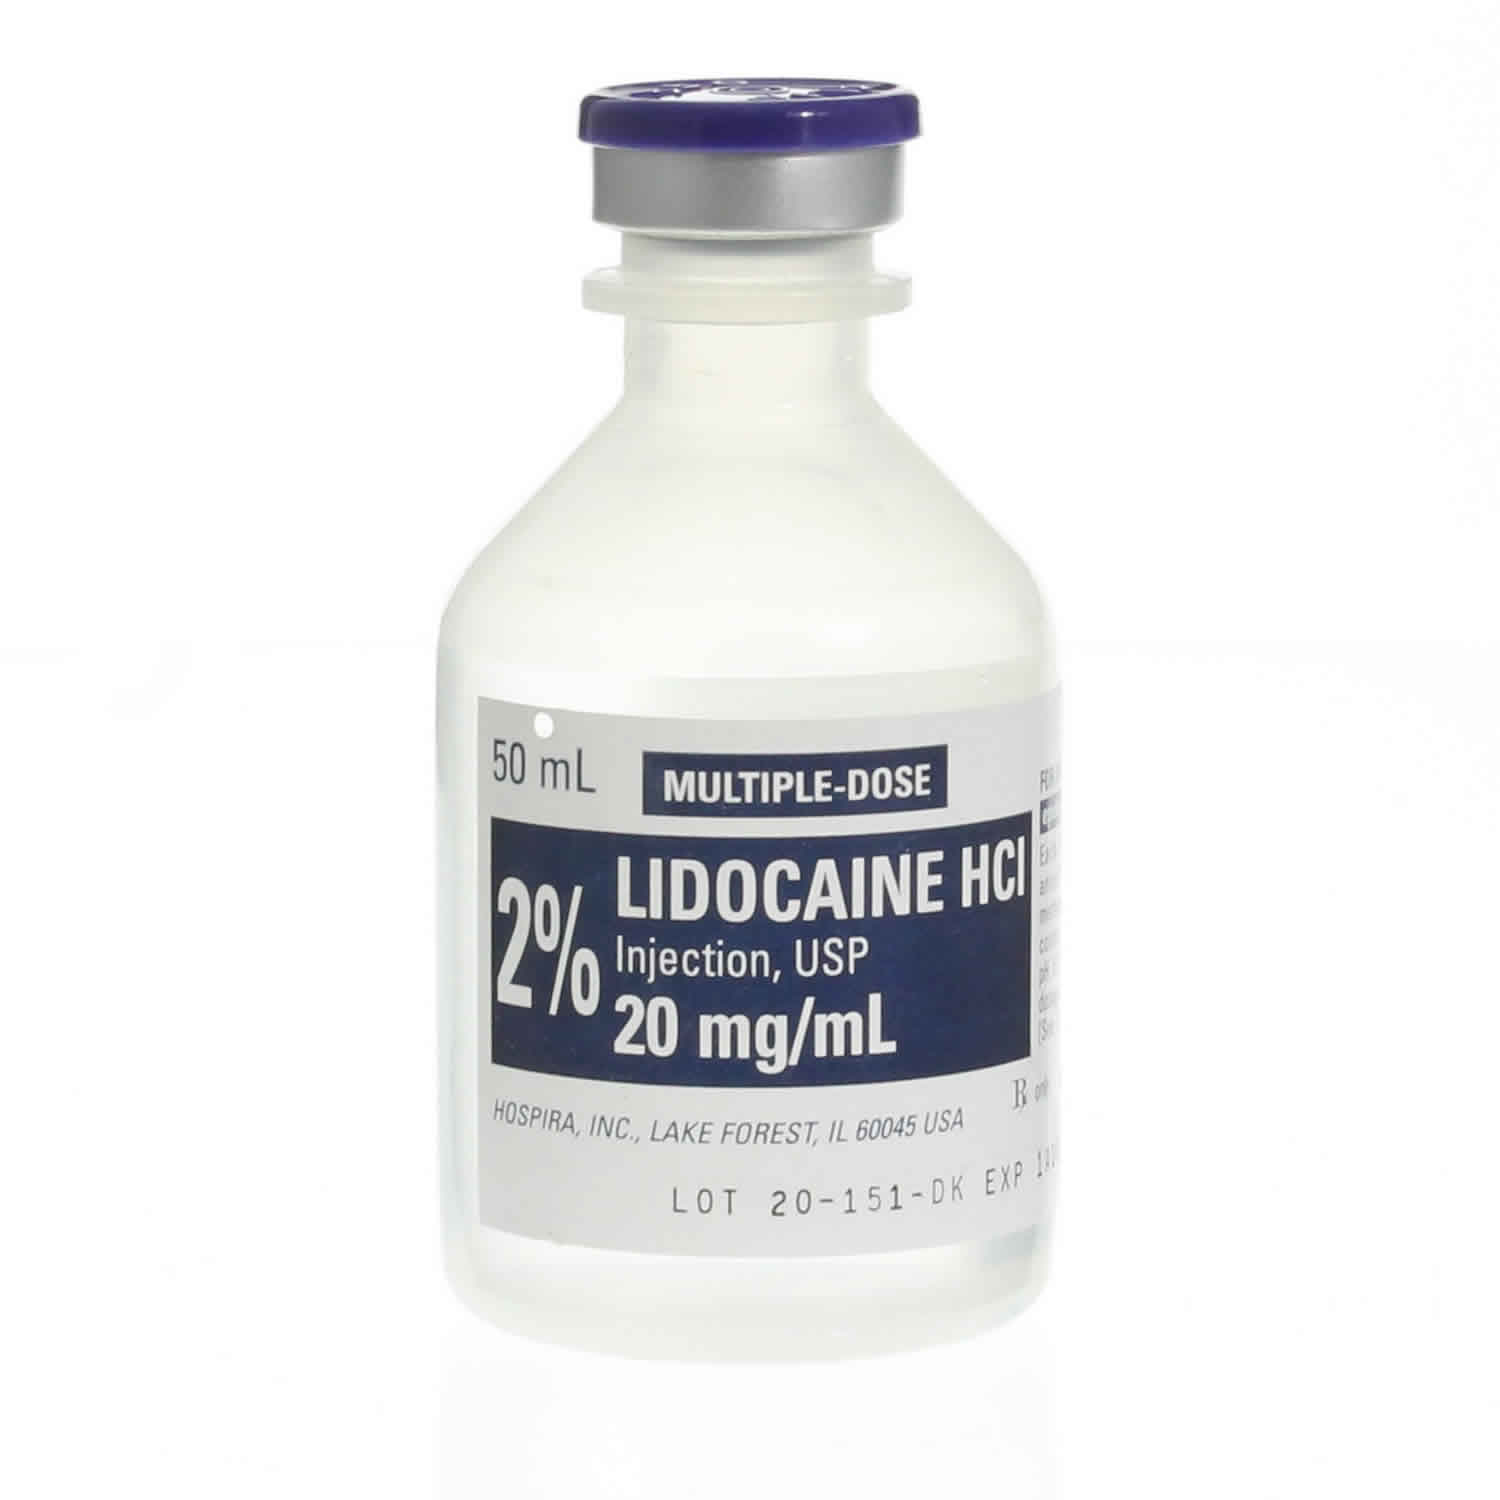 Lidocaine injection or patch uses, contraindications, side effects